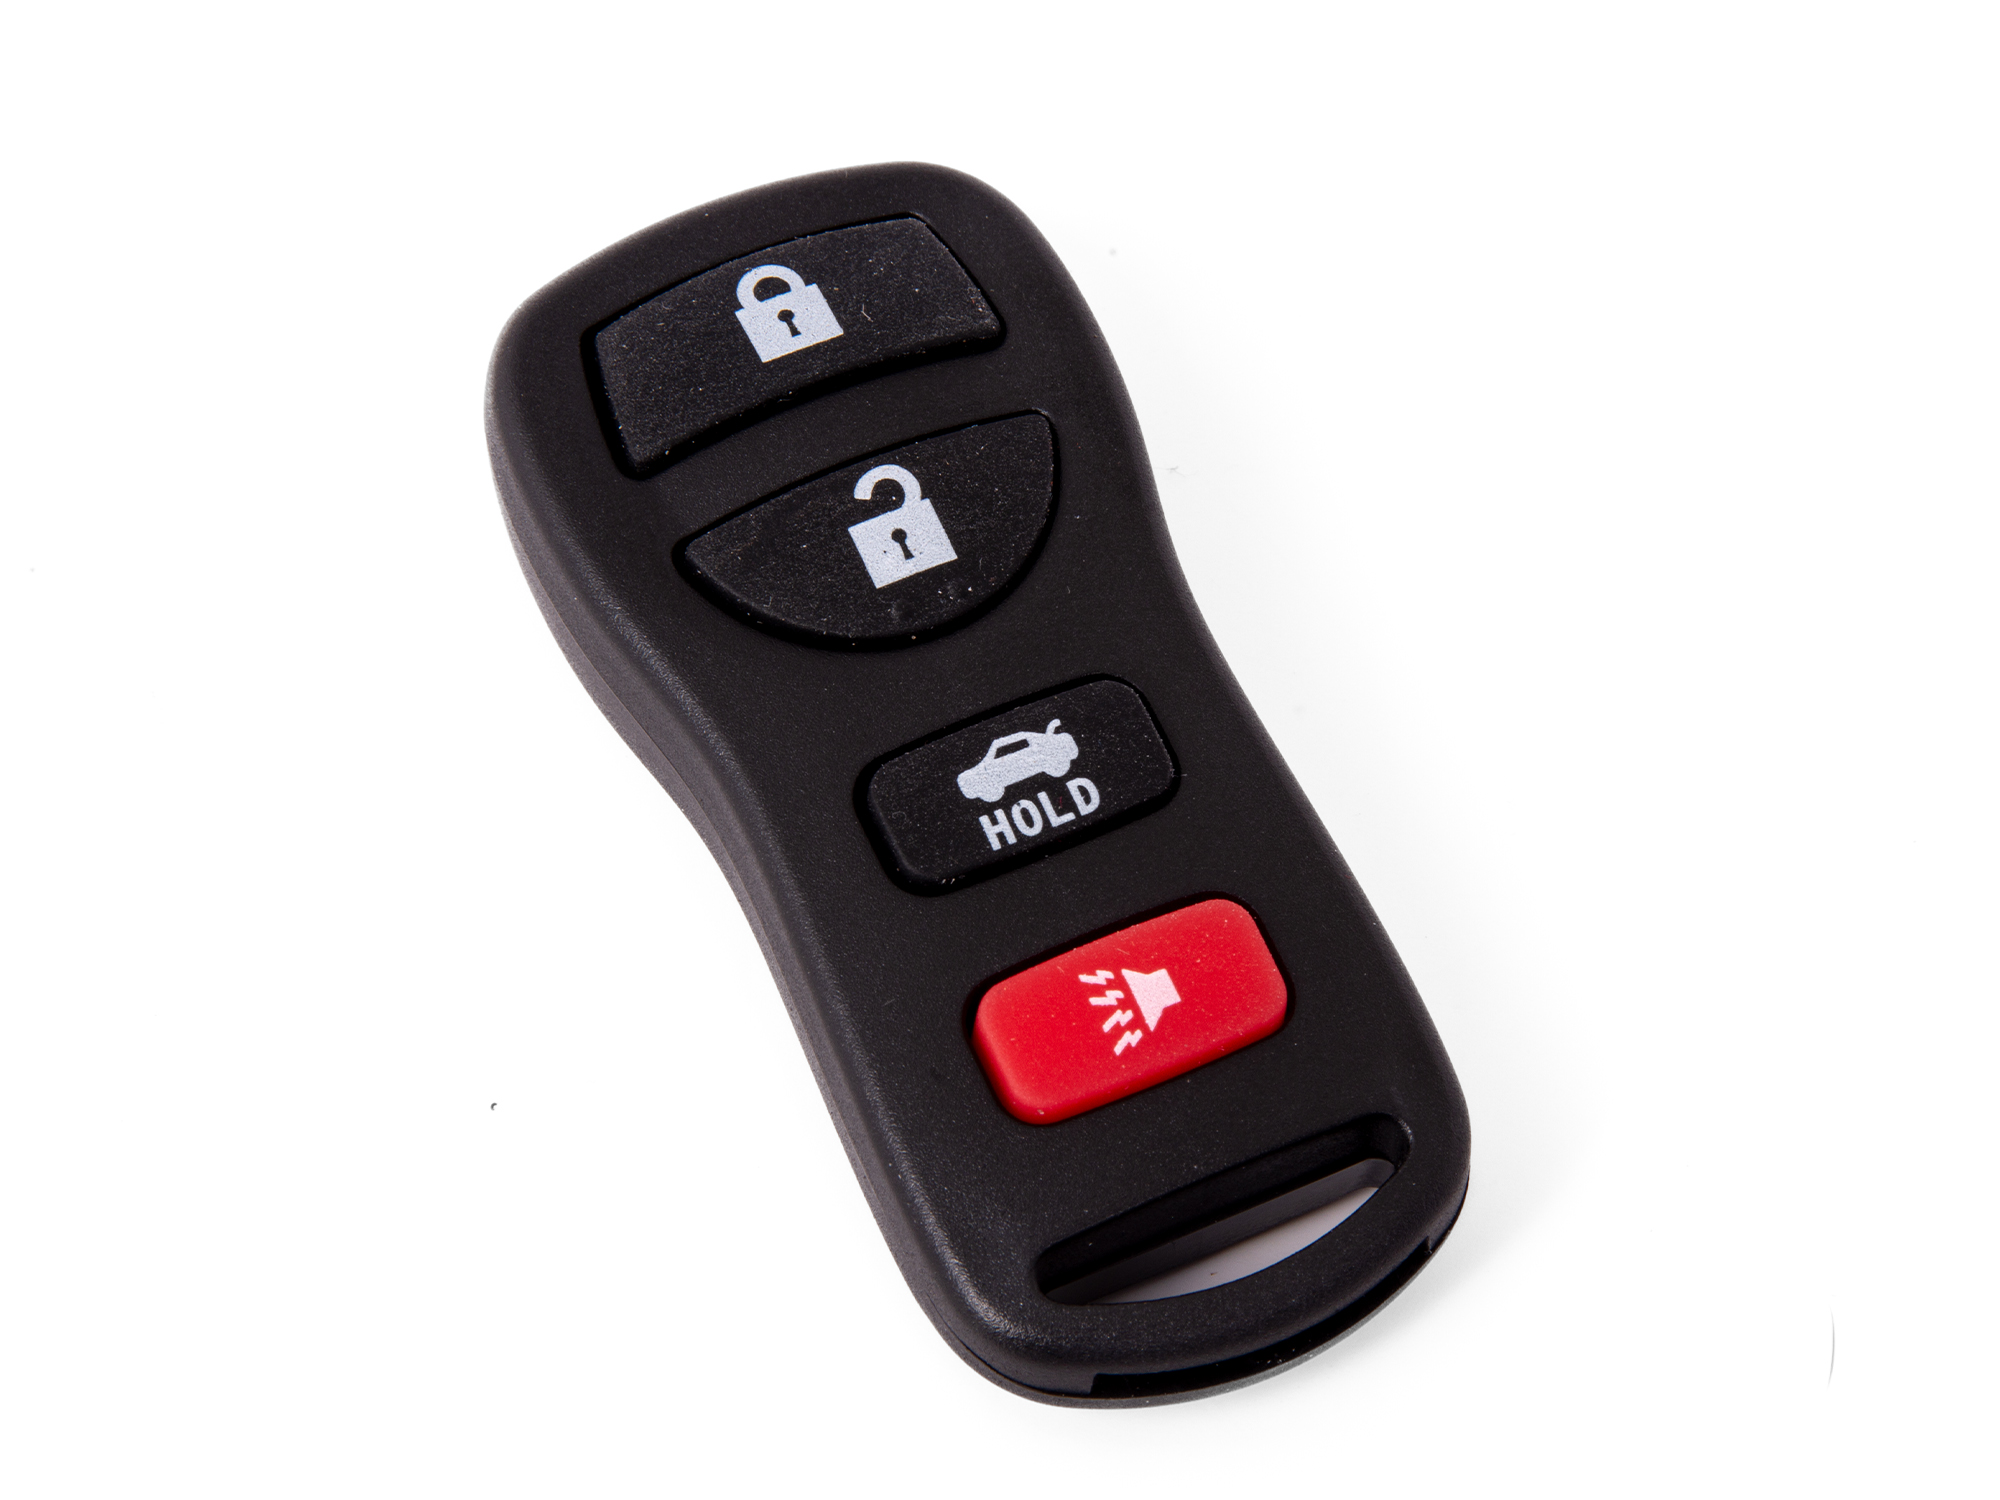 New For Nissan ASTU15 Key Fob Remote Control Case Shell with Battery CR2025 